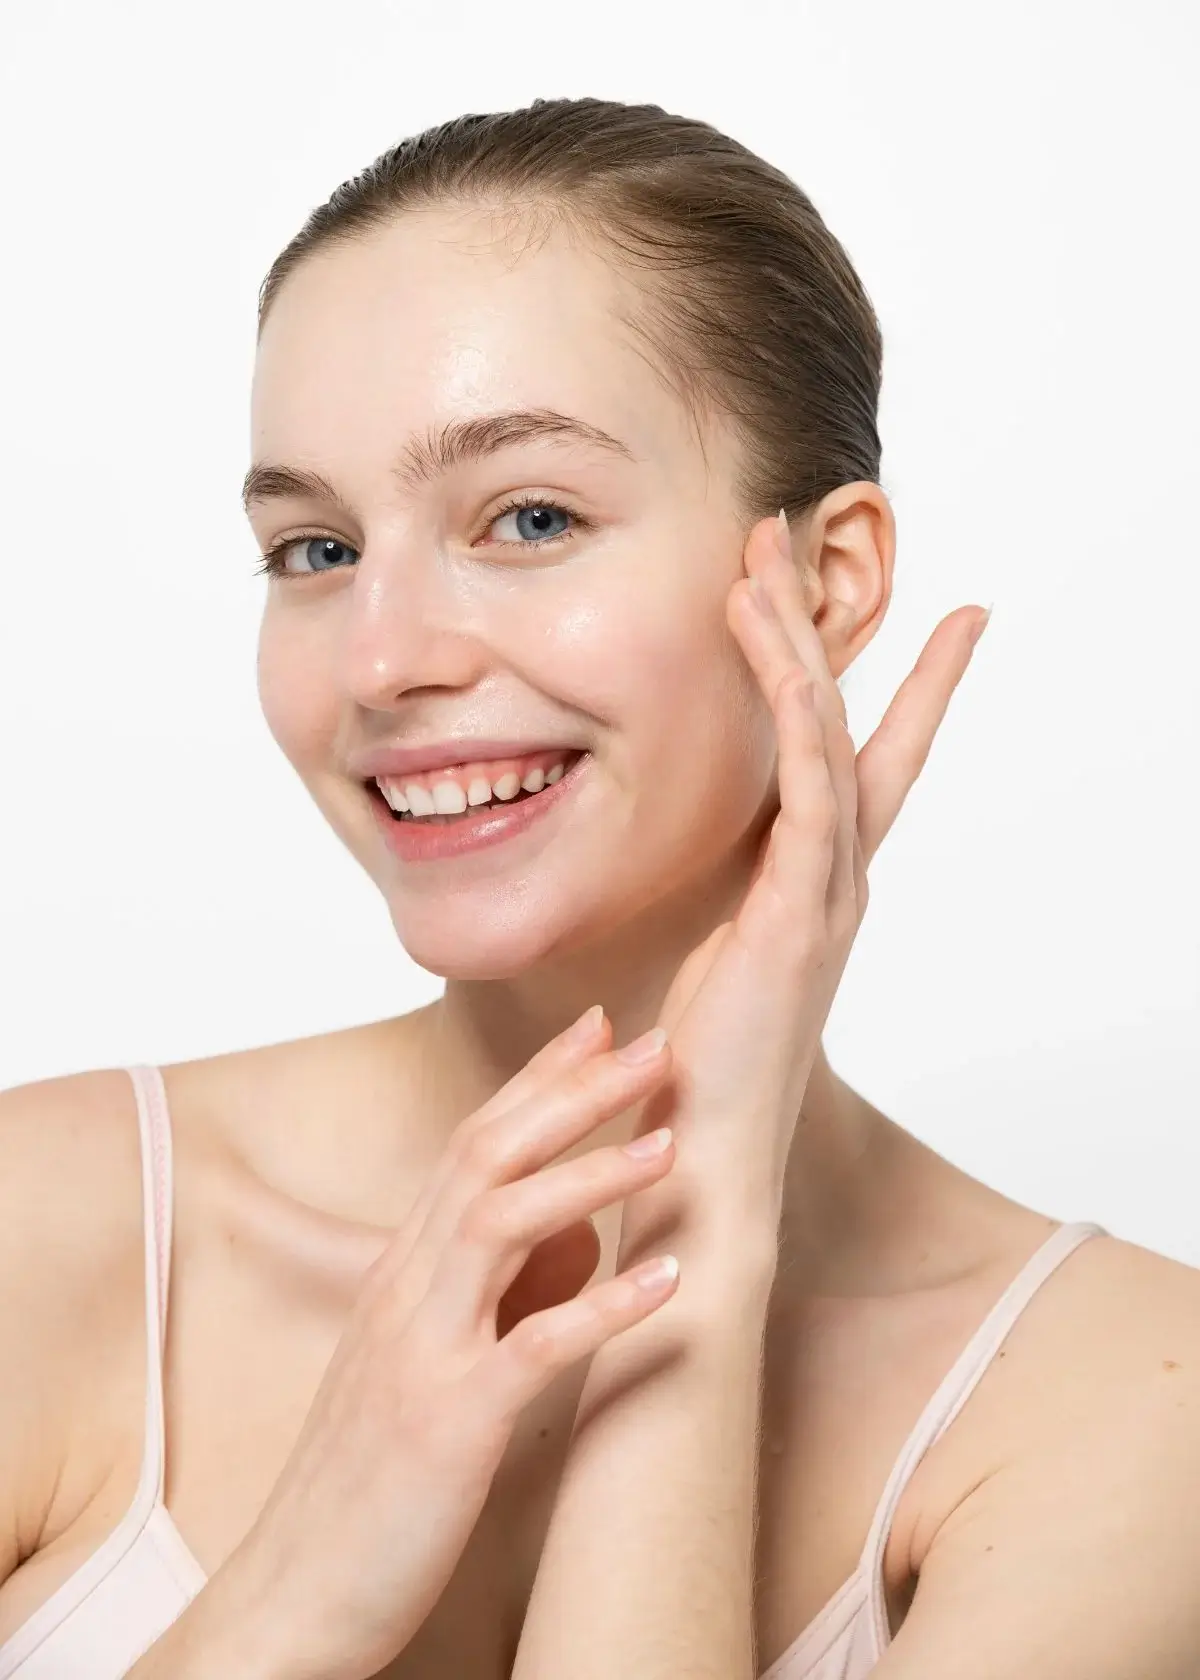 What are the benefits of using anti-aging skincare?